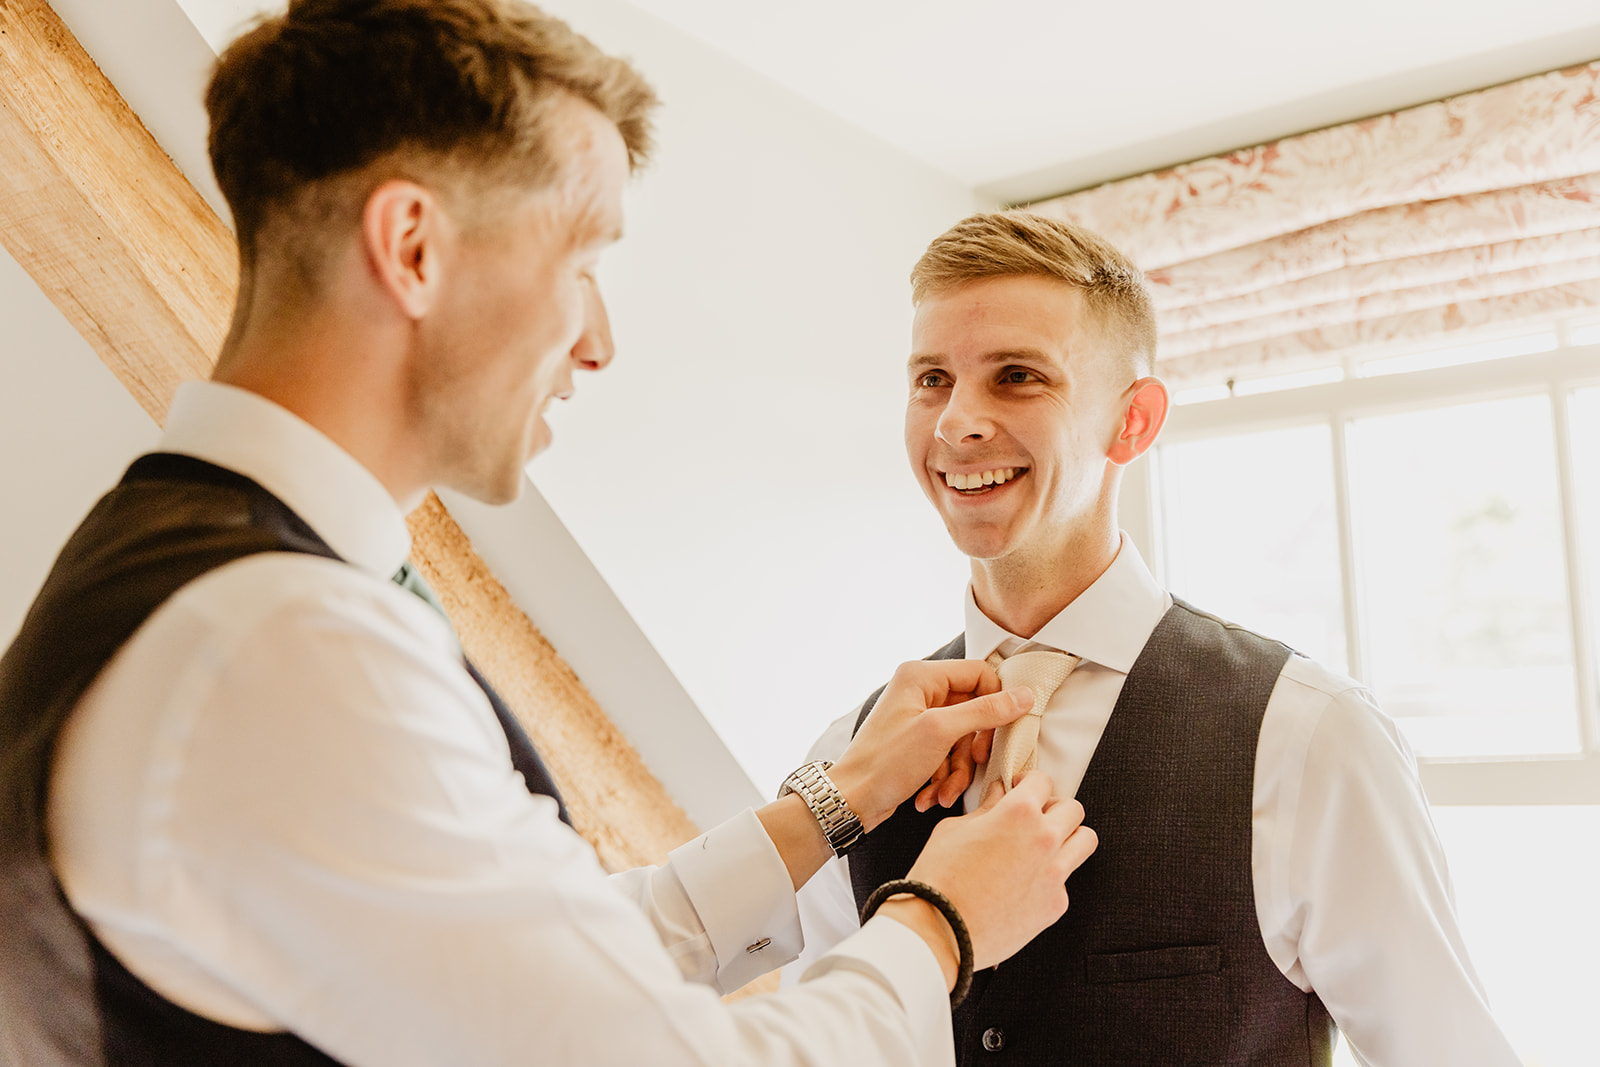 Groom having his tie tied at a Bury Manor Barn Wedding in Sussex. Photographer OliveJoy Photography.